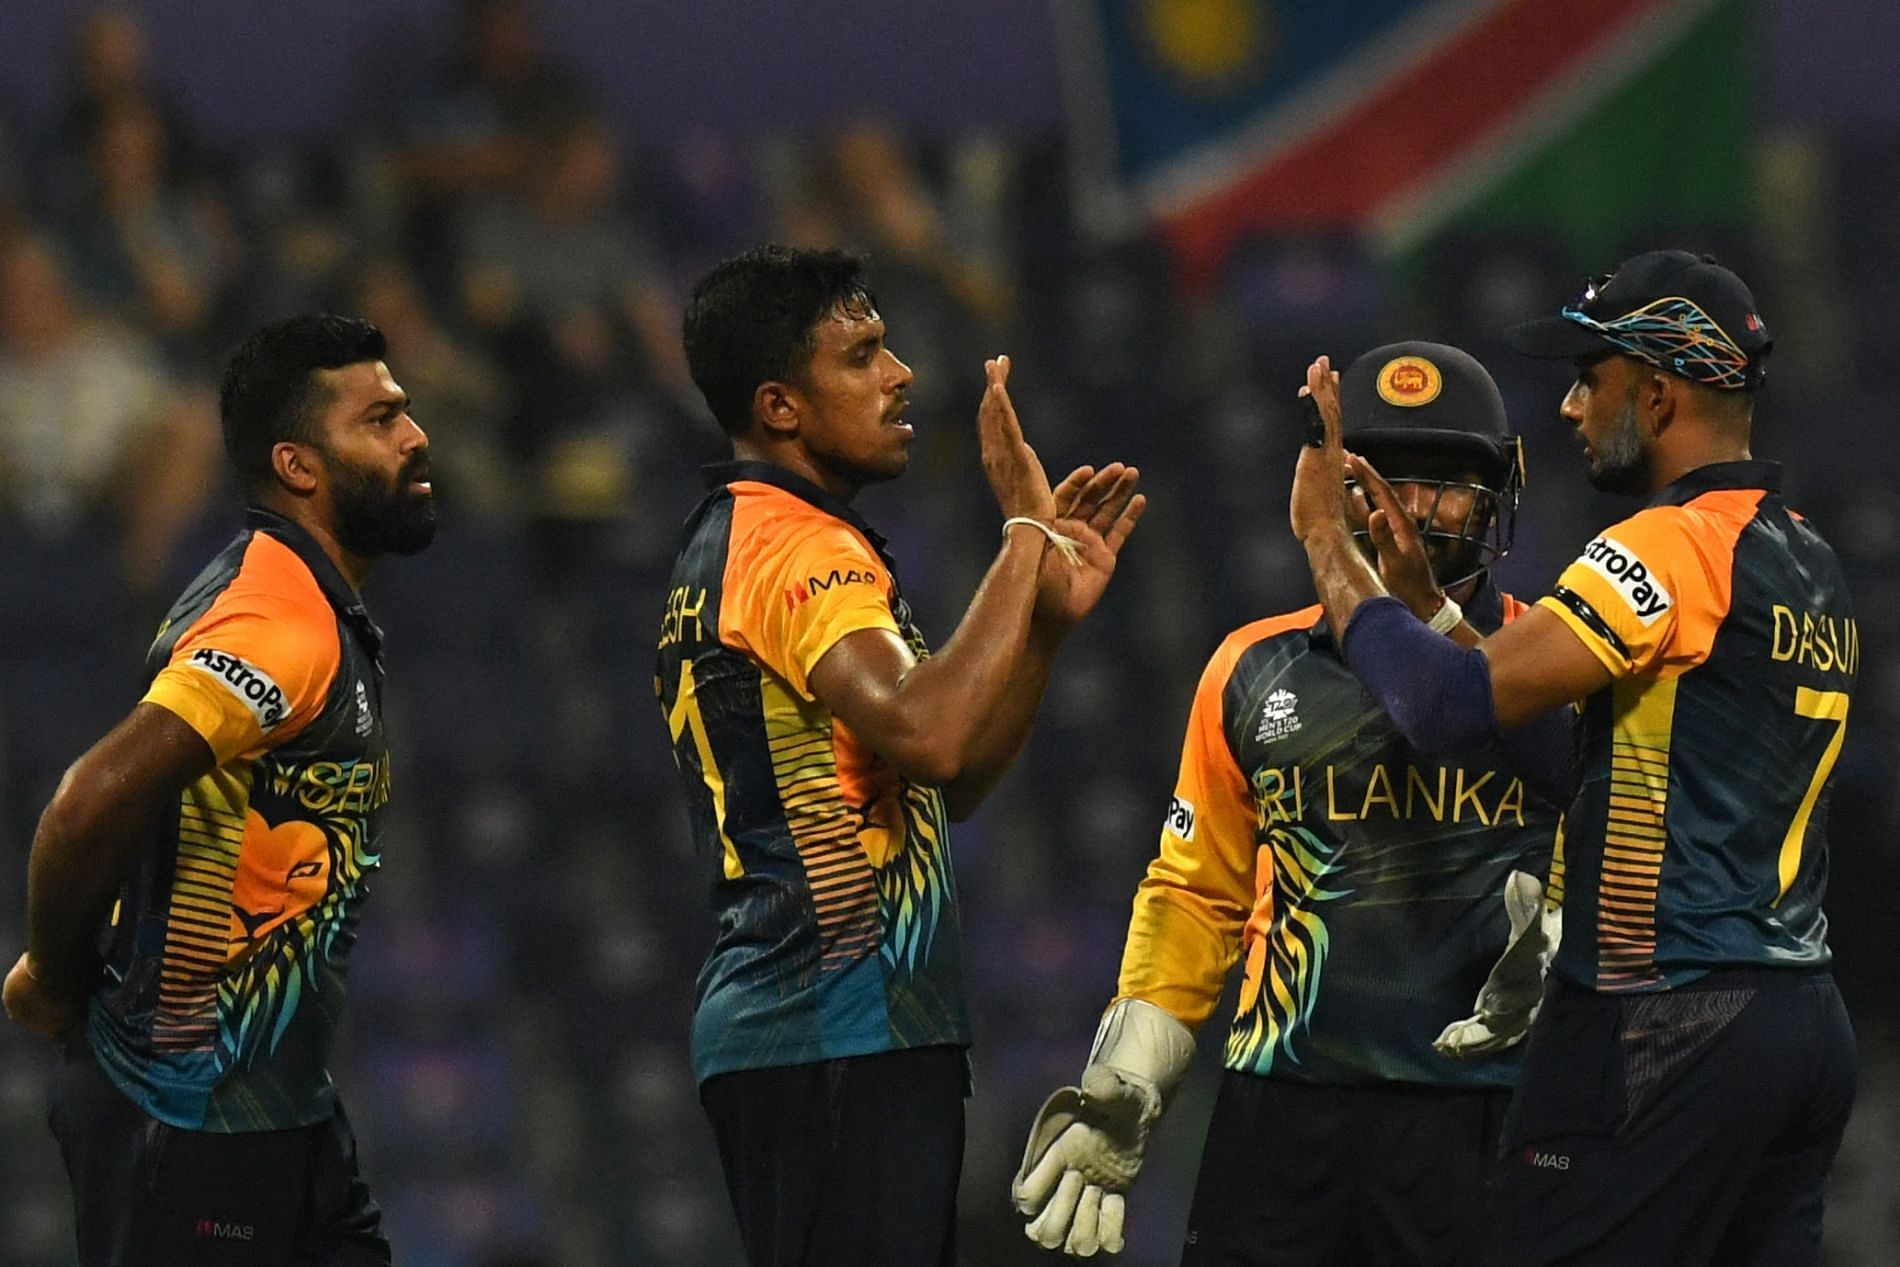 Sri Lankan team celebrates a wicket against Namibia. Pic: T20WorldCup/ Twitter